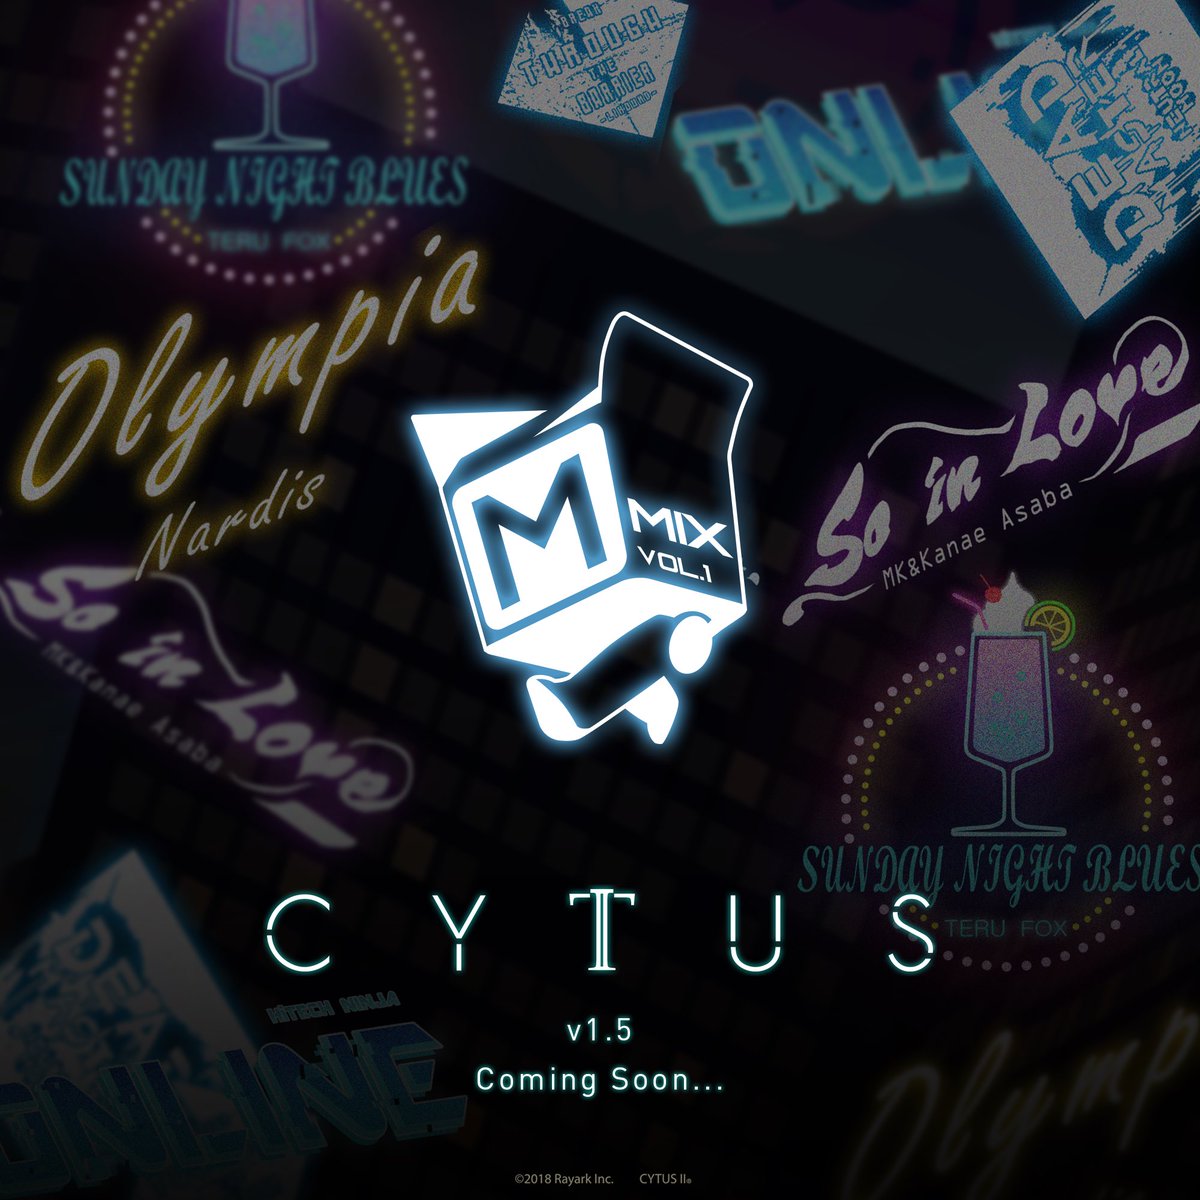 Cytus Cytus 公式 Analyzing Content 100 Extracting Song Data 100 Decoding Character String Neutral Moon Lixound Hitech Ninja Teru Mk Kanae Asaba System Reset Unidentified Signal Source Detected Keyword Obtained Major